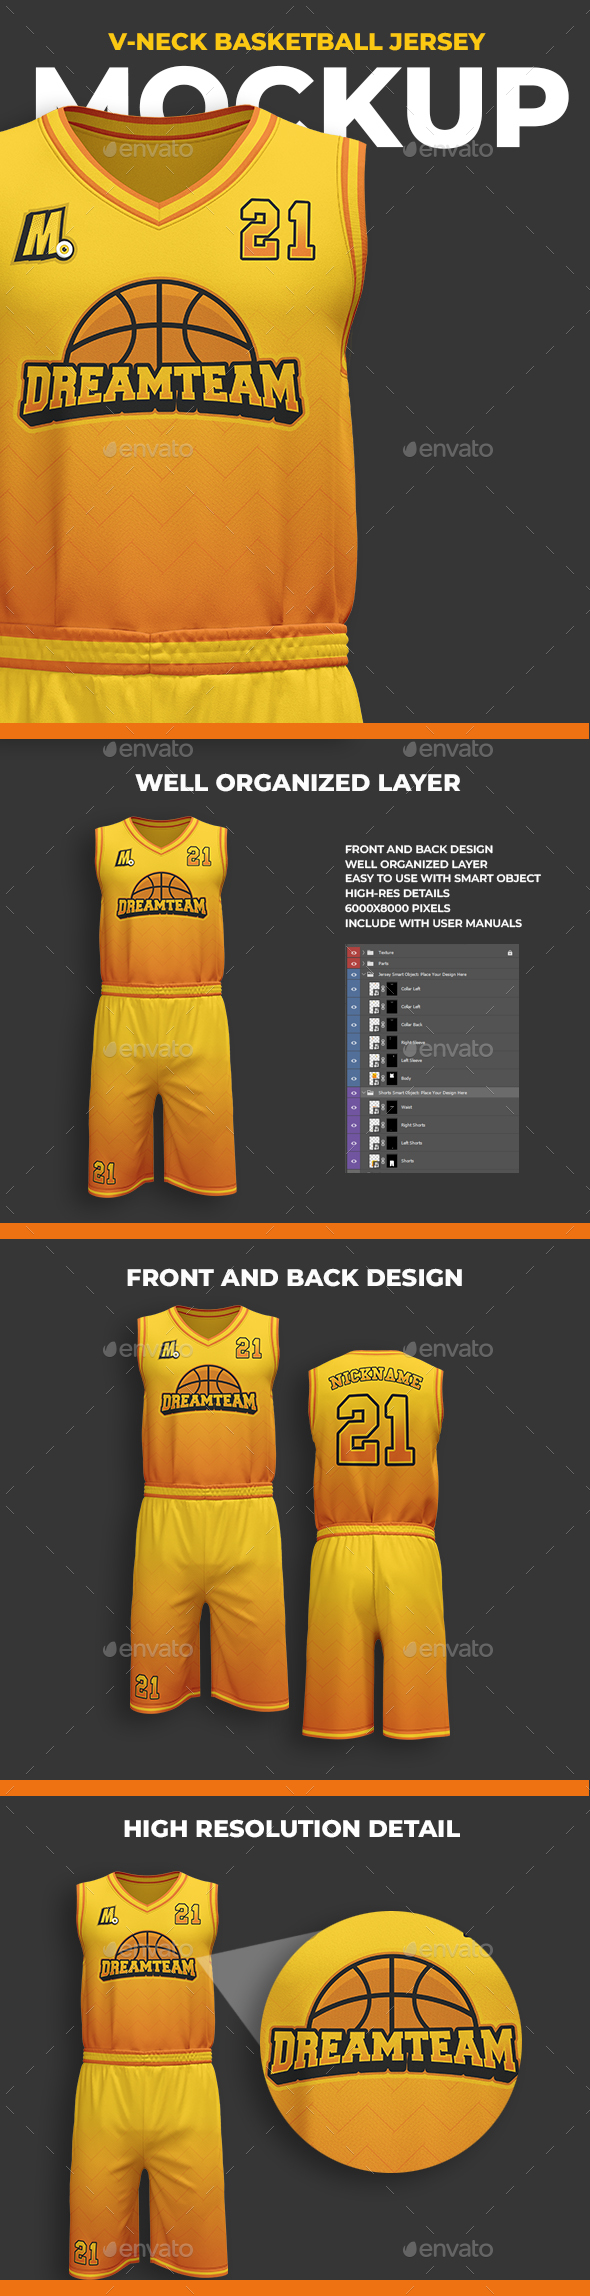 Basketball Jersey Mockup, Graphic Templates - Envato Elements